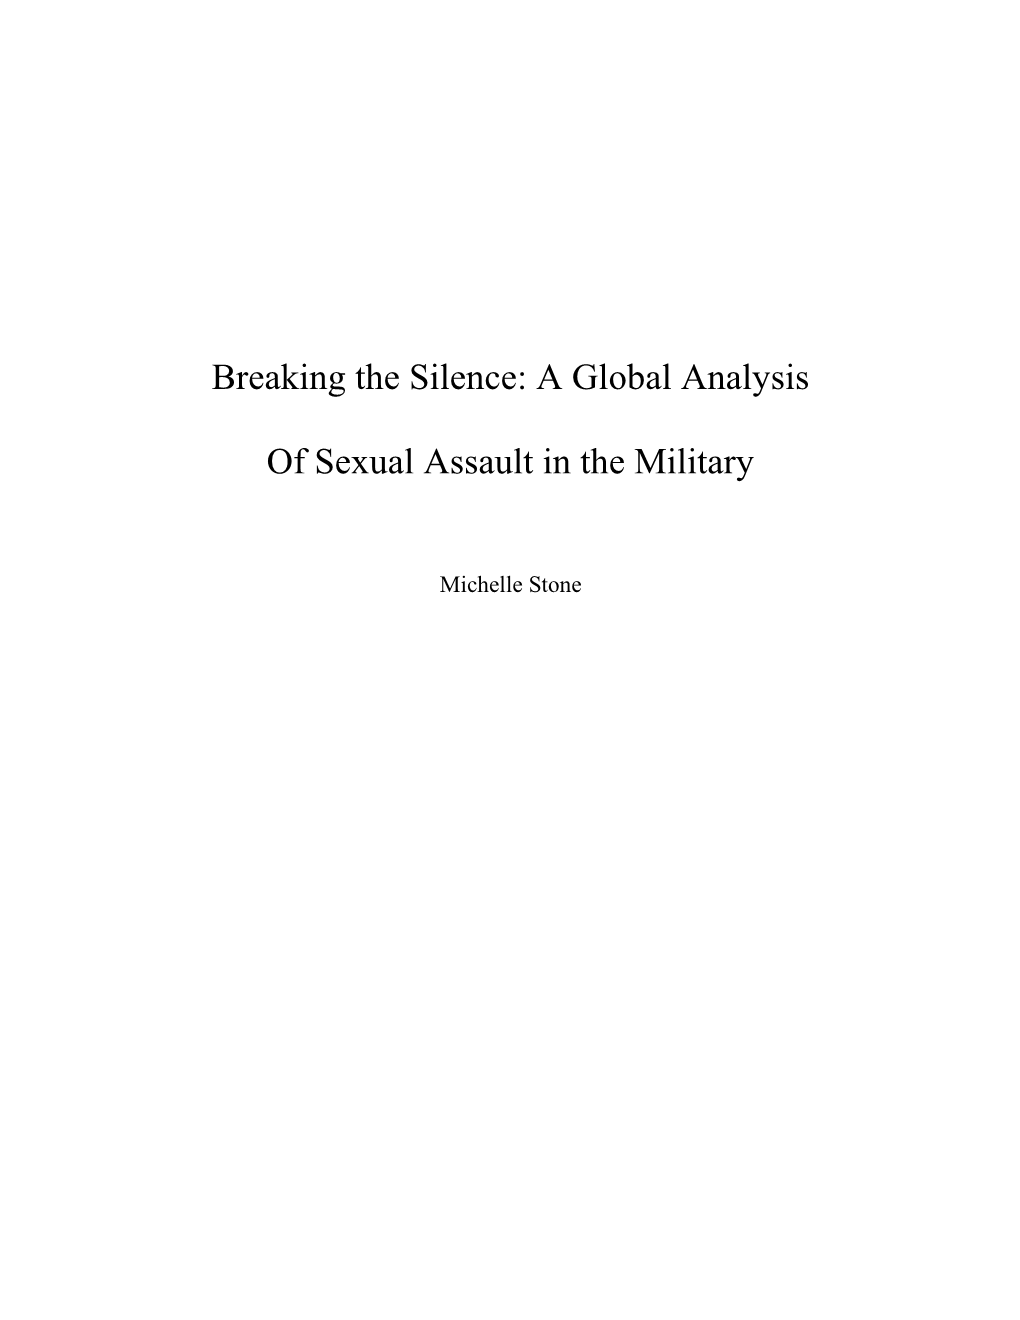 Breaking the Silence: a Global Analysis of Sexual Assault in the Military